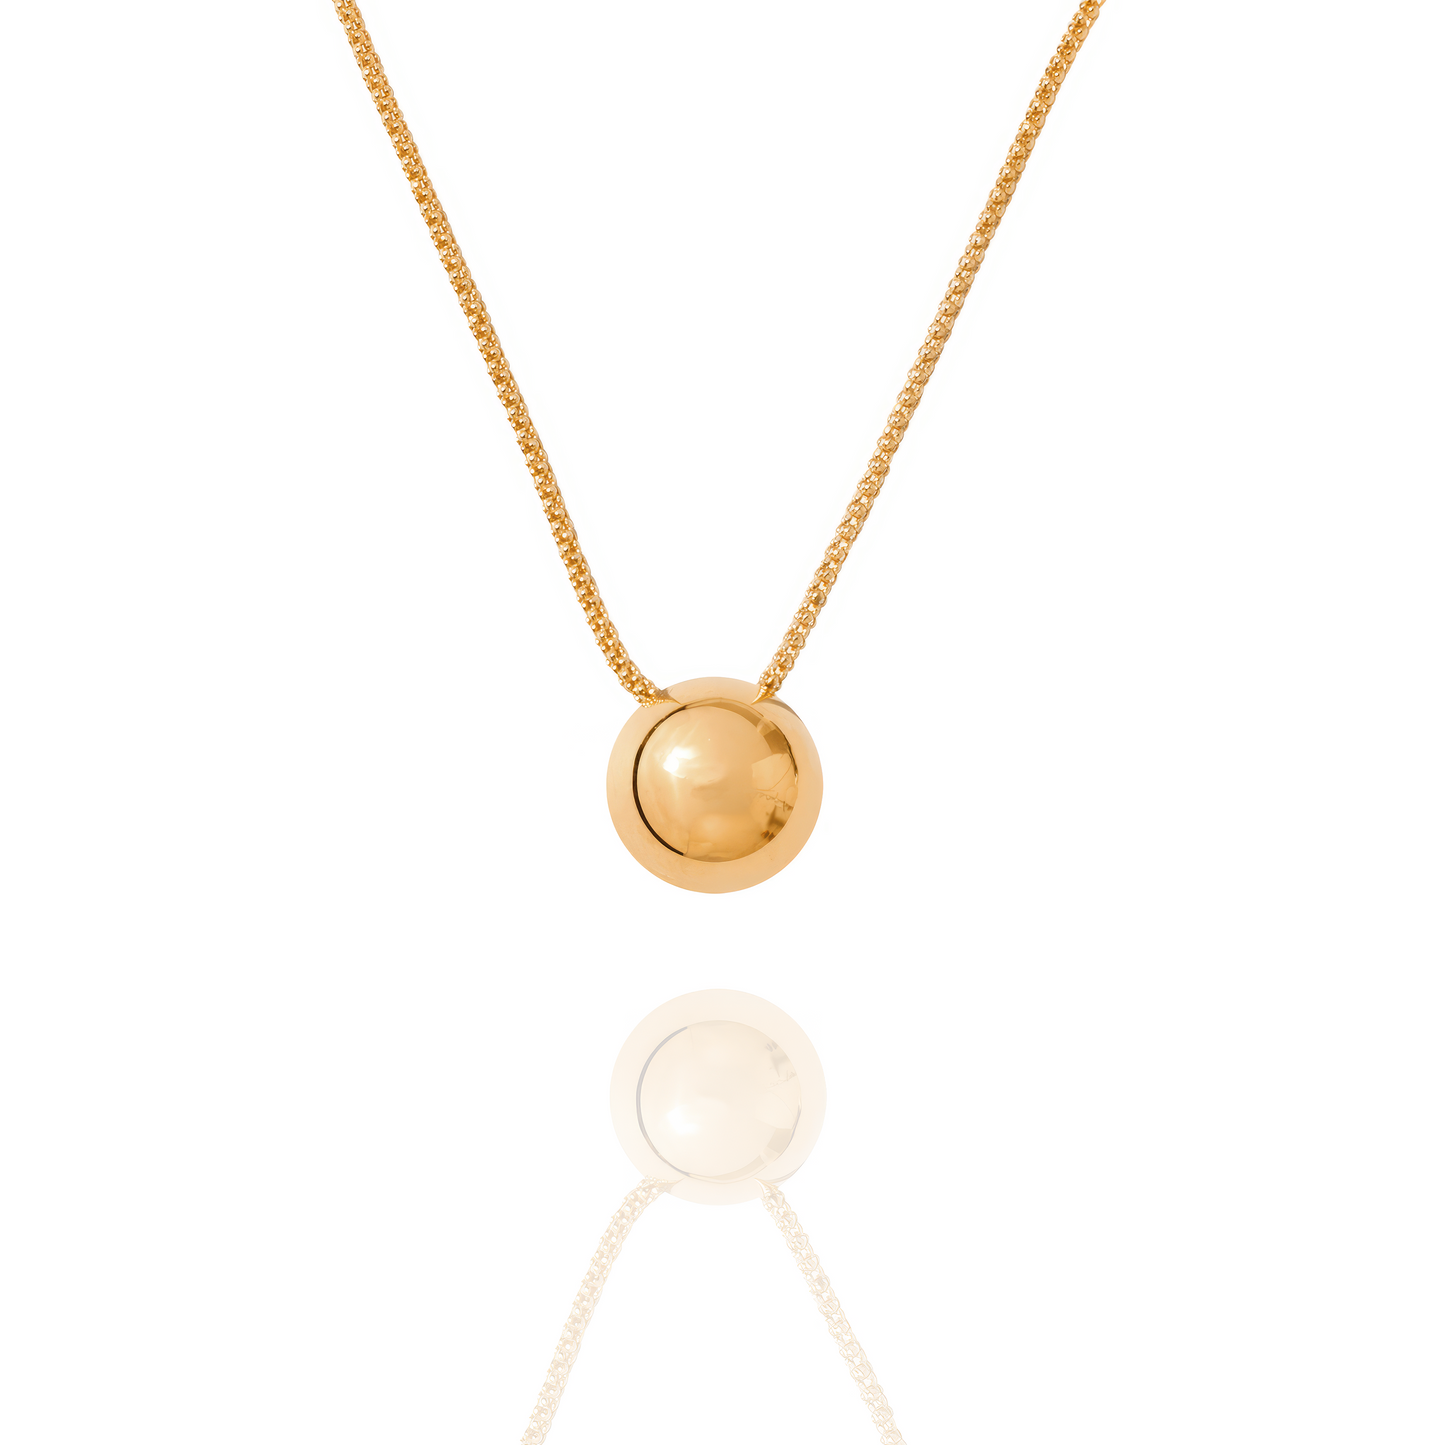 Solid 14k Gold Soul Sphere Necklace close-up